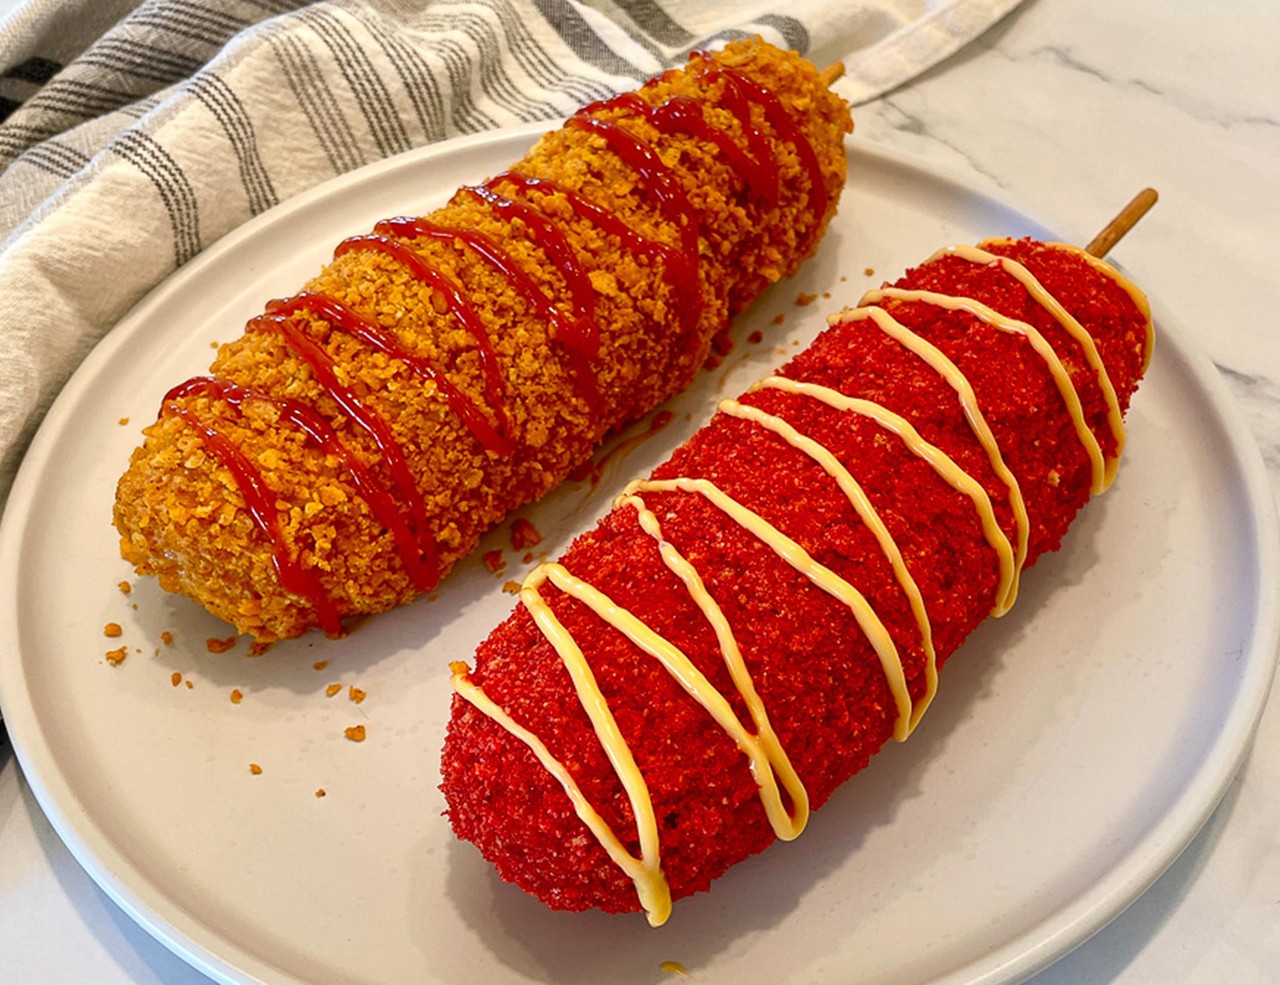 SPICY KOREAN CORNDOG
Hot dog, dipped in buttermilk batter, layered with cheese, and rolled in crushed spicy hot Cheetos. 
Seivers Smokehouse Grill